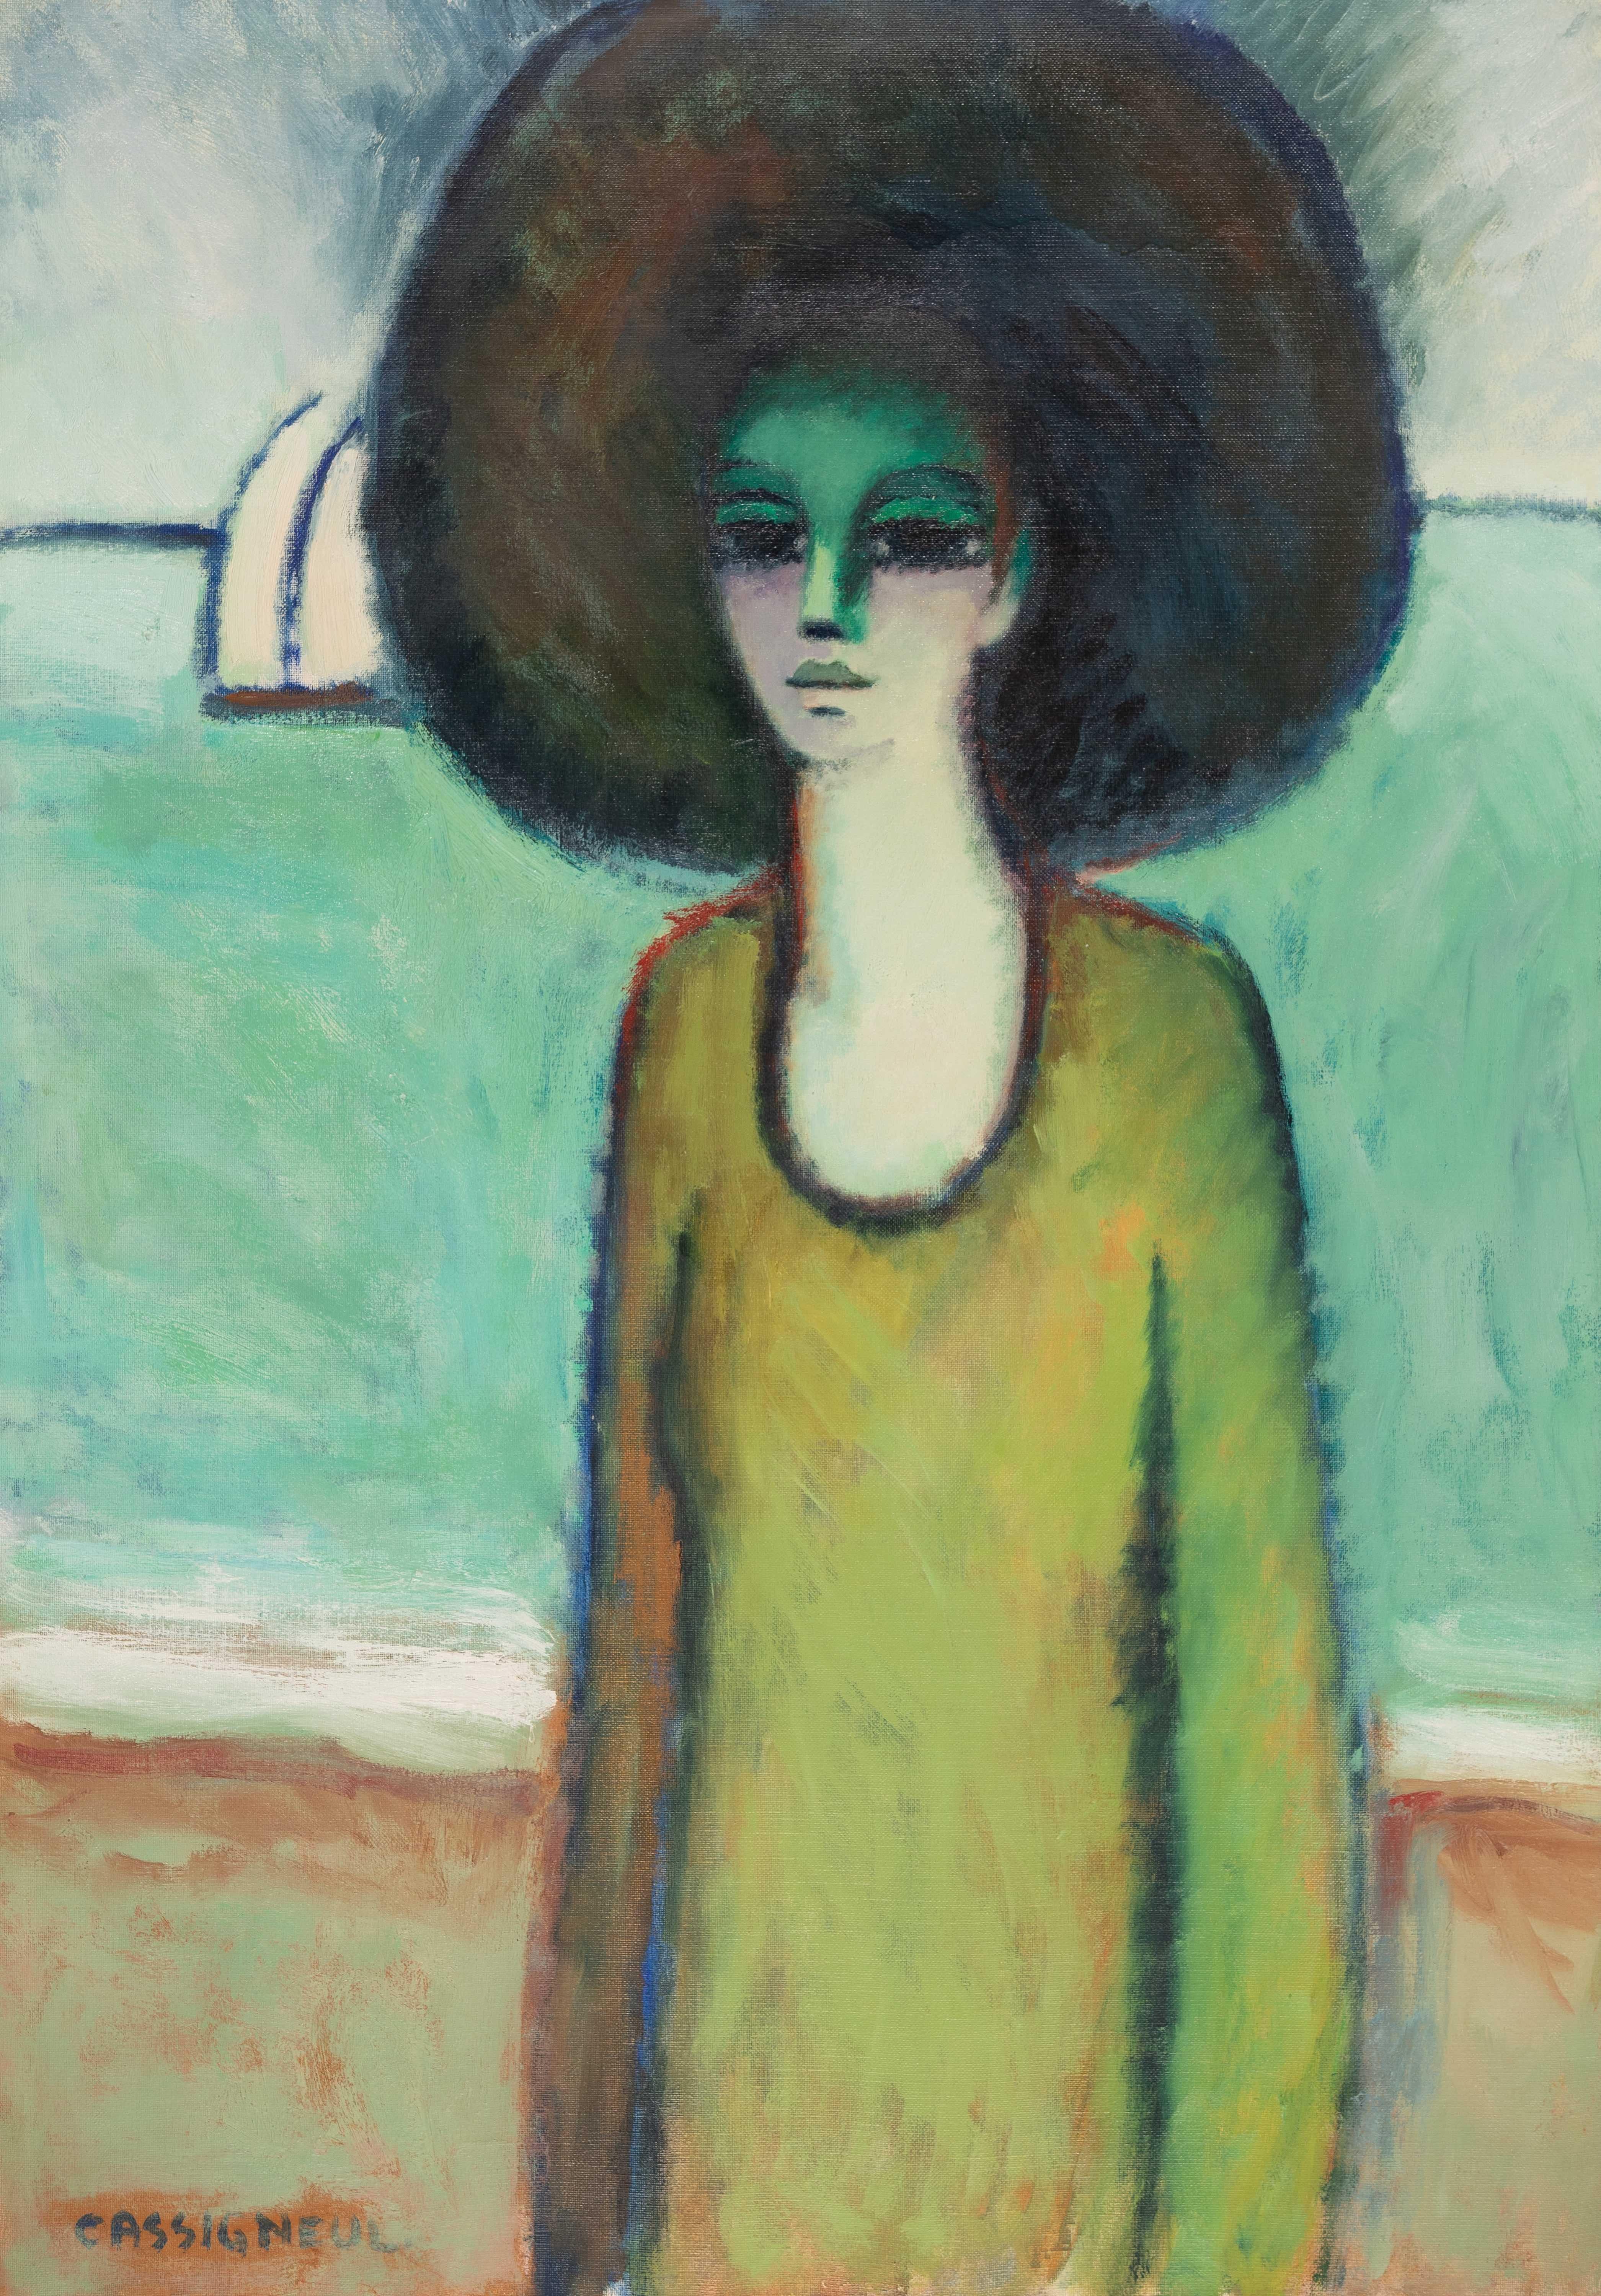 *PLEASE NOTE UK BUYERS WILL ONLY PAY 5% VAT ON THIS PURCHASE.

Femme au bord de la mer by Jean-Pierre Cassigneul (b. 1935)
Oil on canvas
92 x 65 cm (36 ¹/₄ x 25 ⁵/₈ inches)
Signed lower left, Cassigneul
Executed in 1968

This work is accompanied by